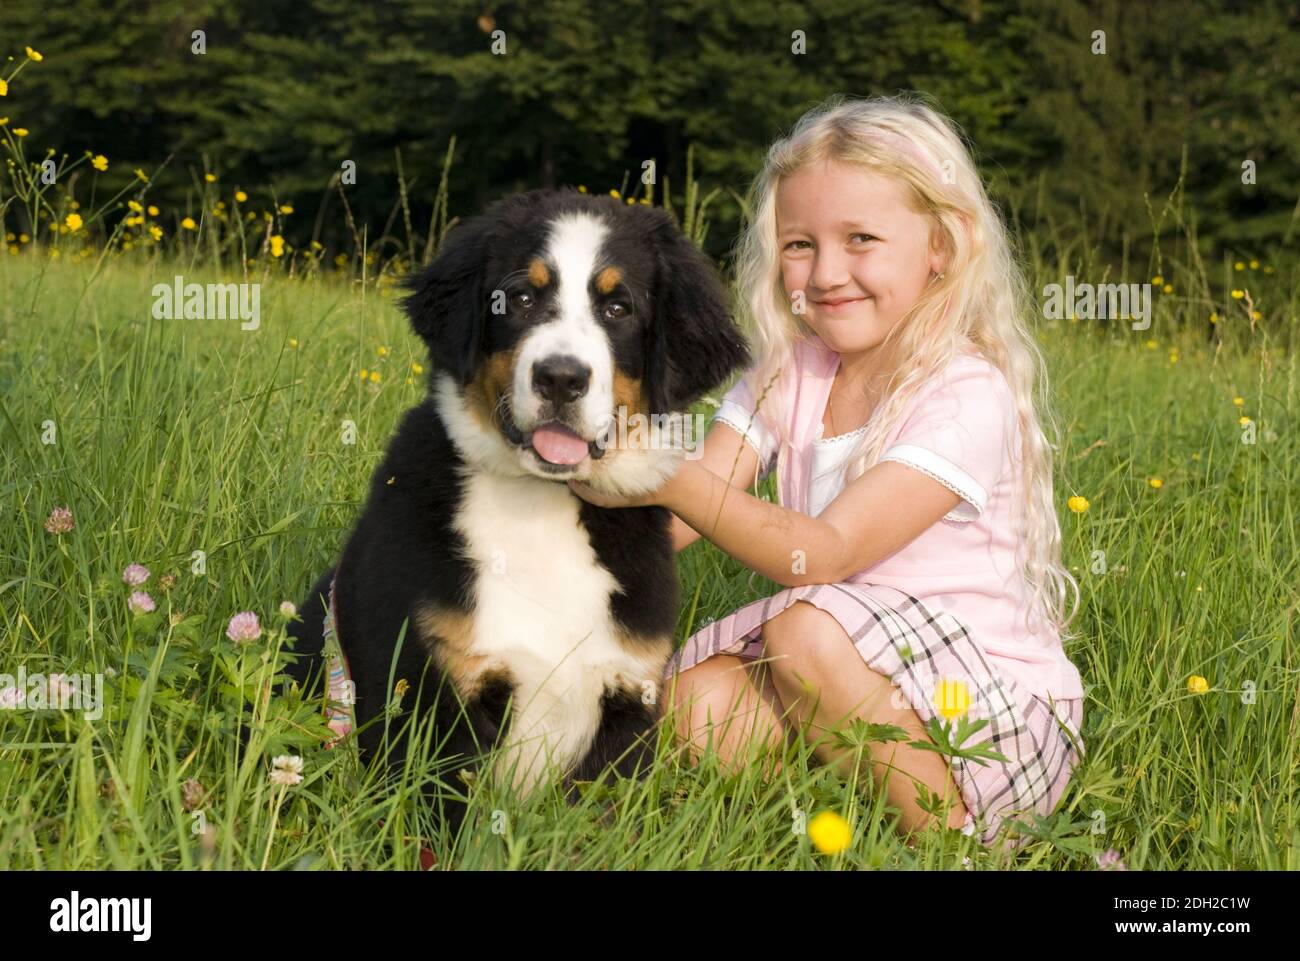 Berner Hund High Resolution Stock Photography and Images - Alamy